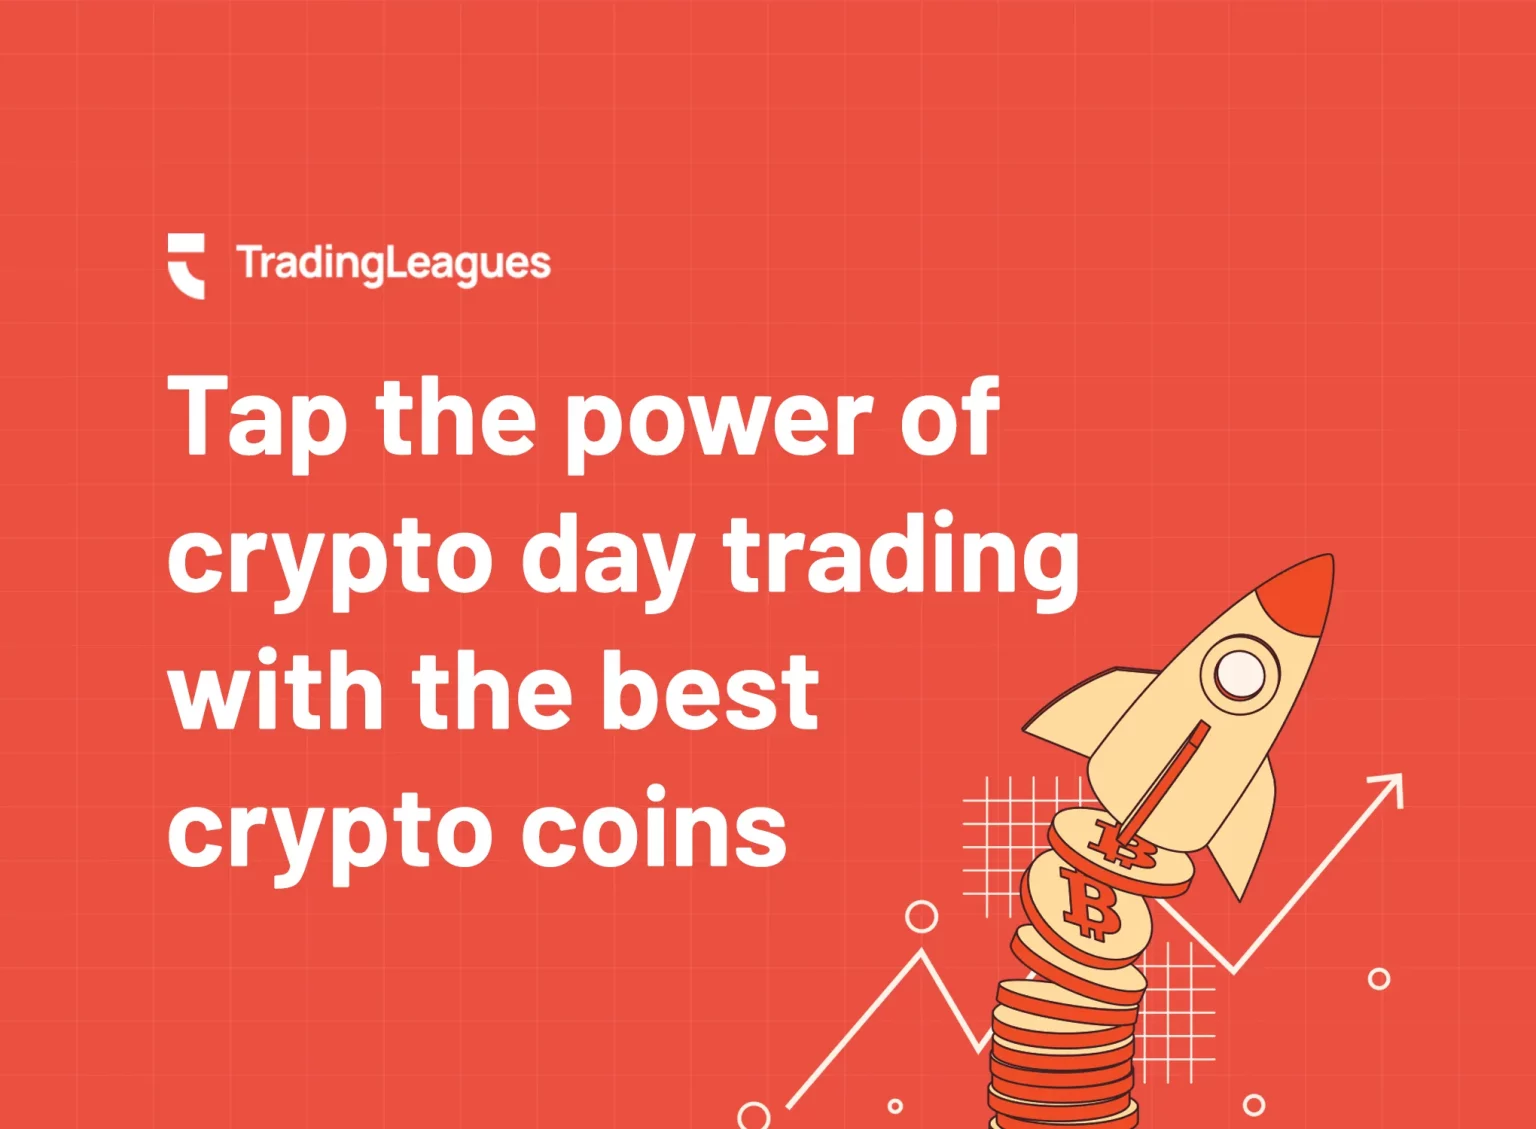 Best crypto to buy now: How to pick a cryptocurrency for day trading?